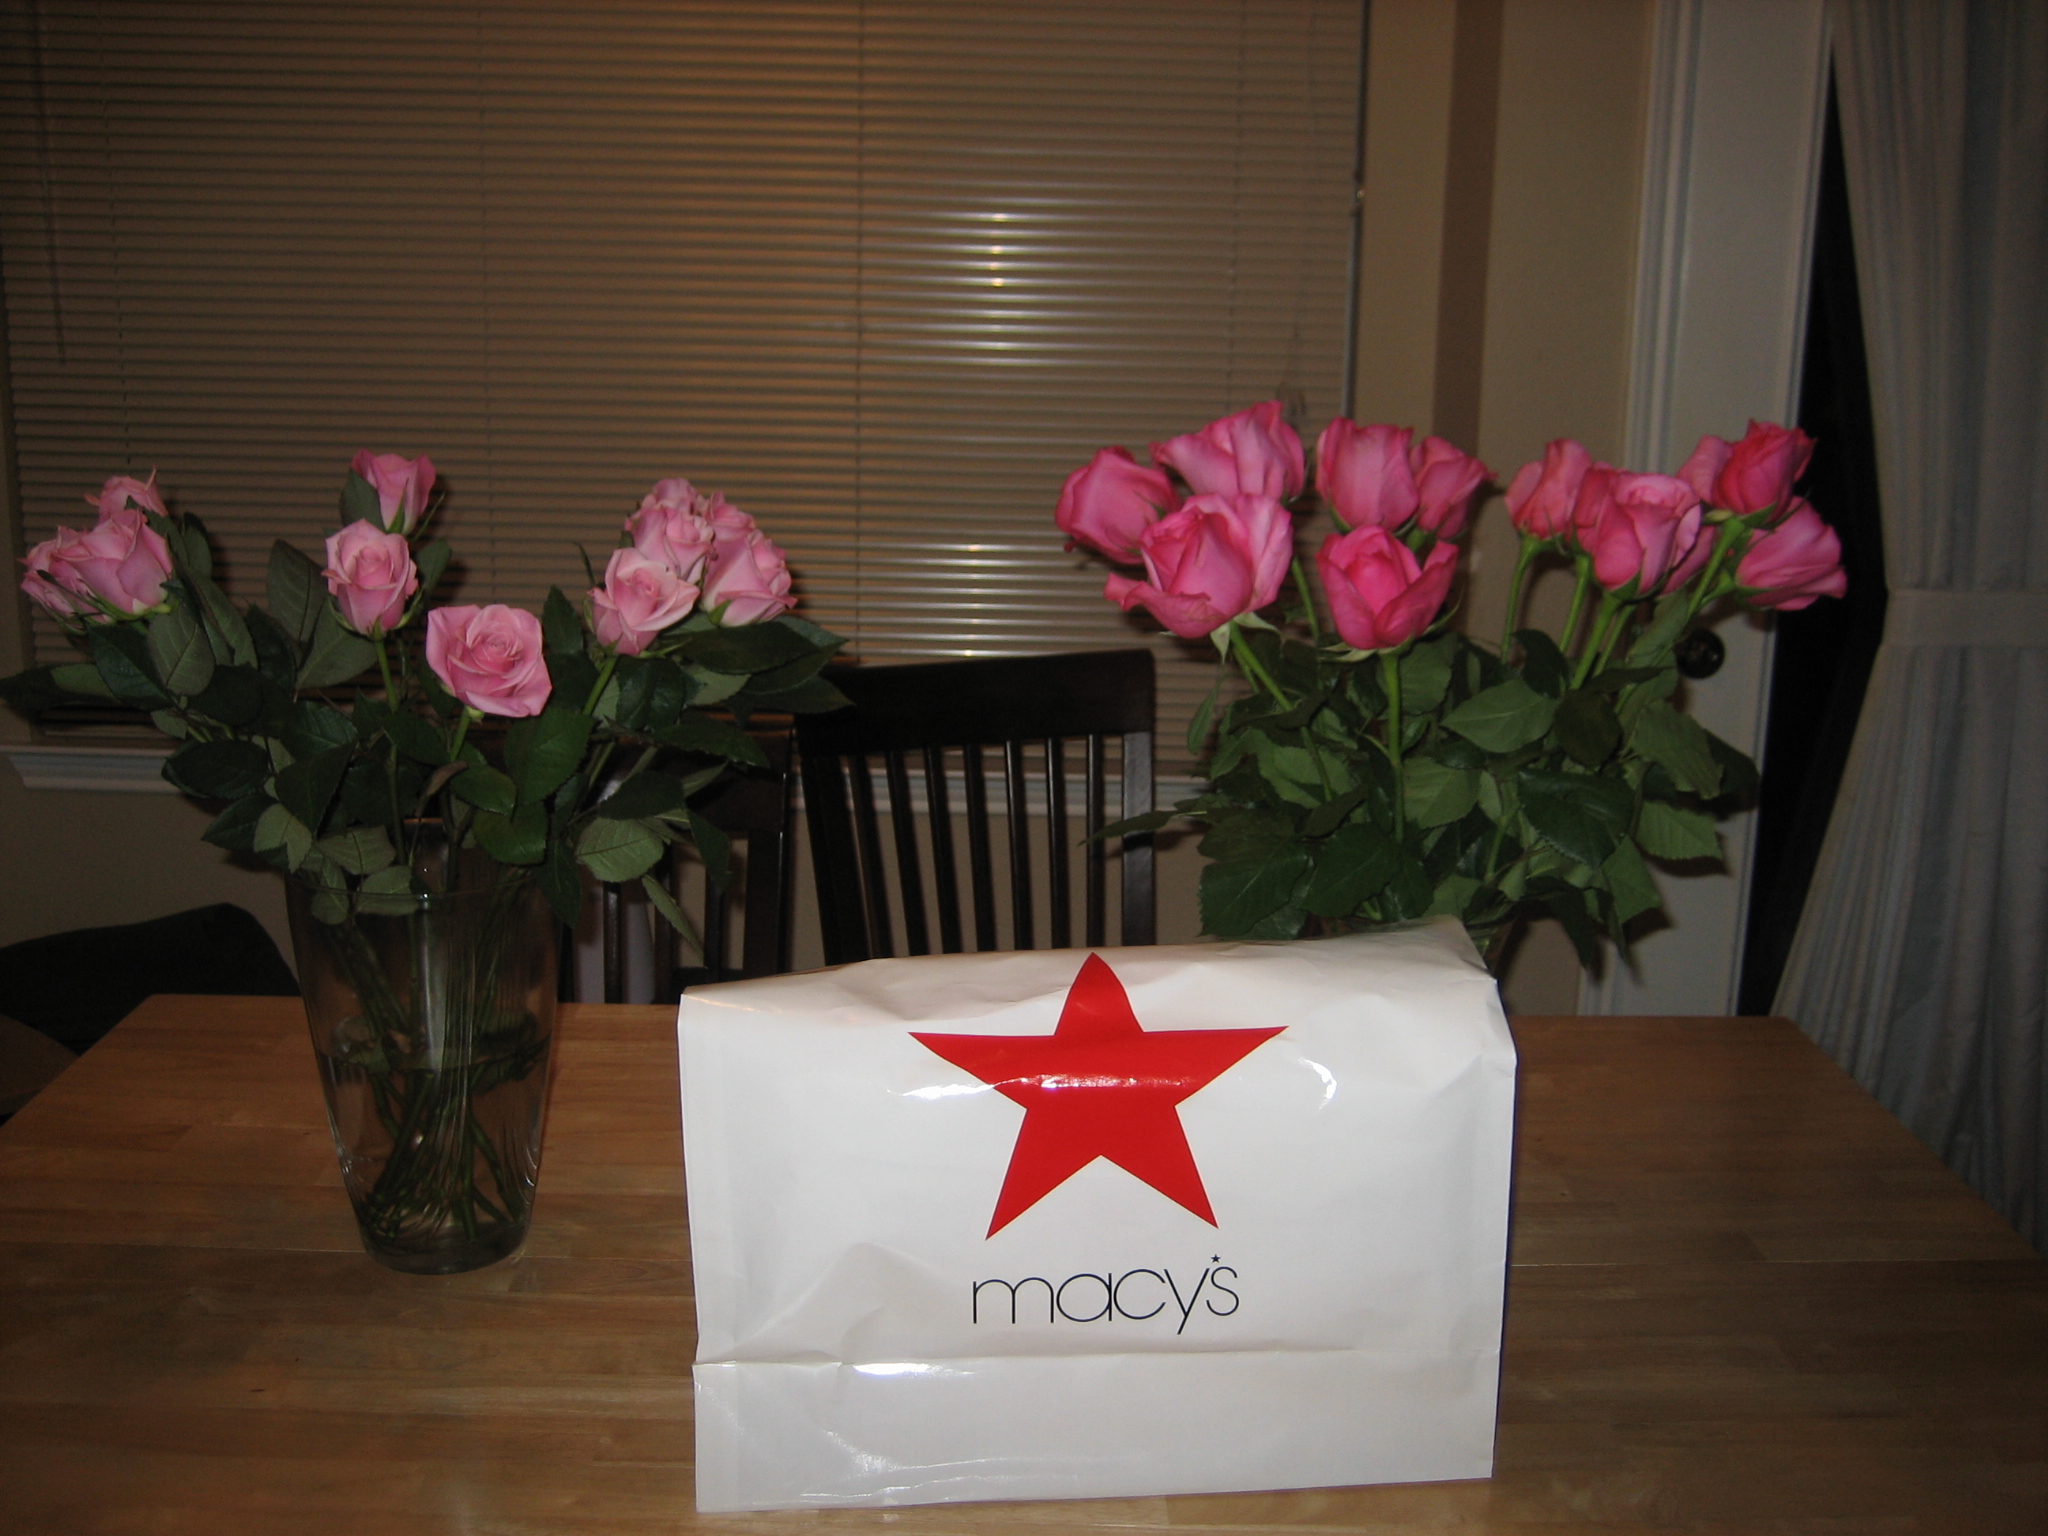 bee-you-tee-ful flowers from my son, daught & hubby! (perfum in bag)